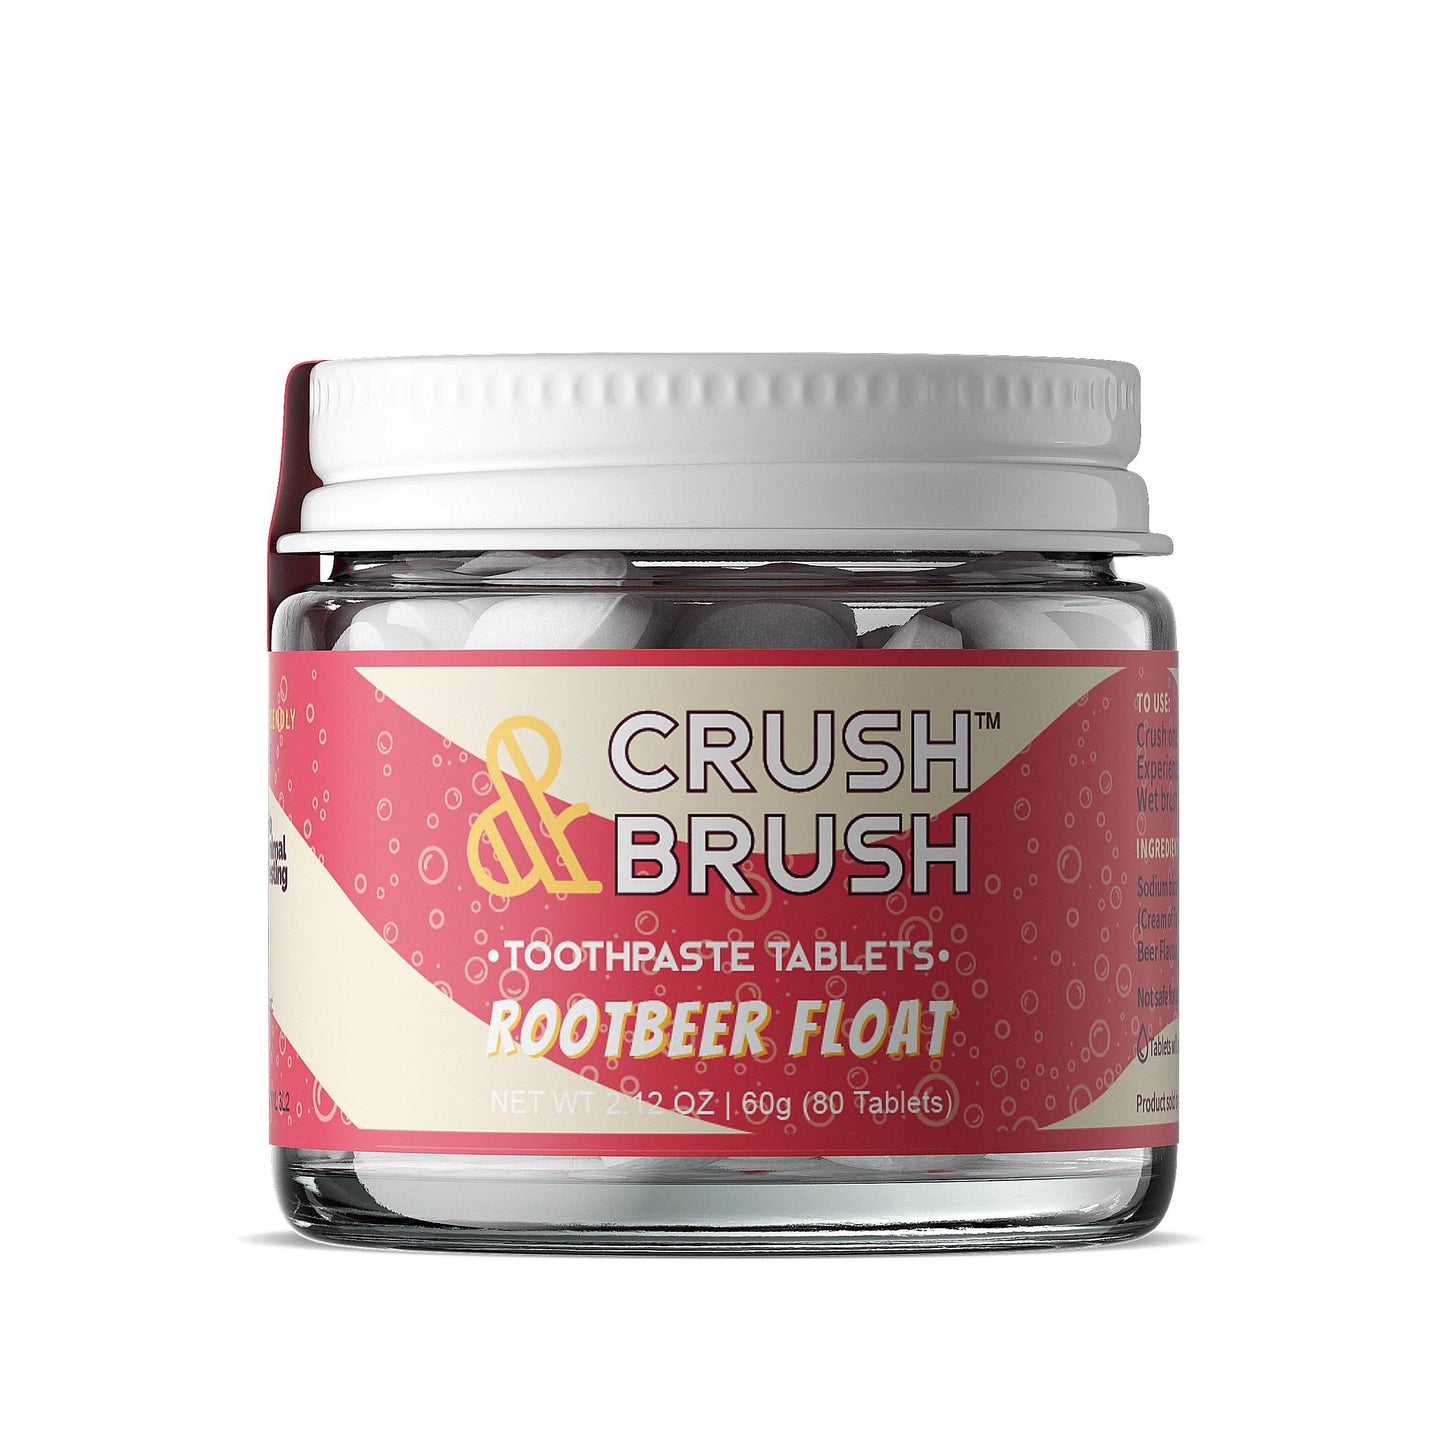 Nelson Naturals - Crush & Brush Toothpaste Tablet - ROOTBEER FLOAT 60g/2.2oz